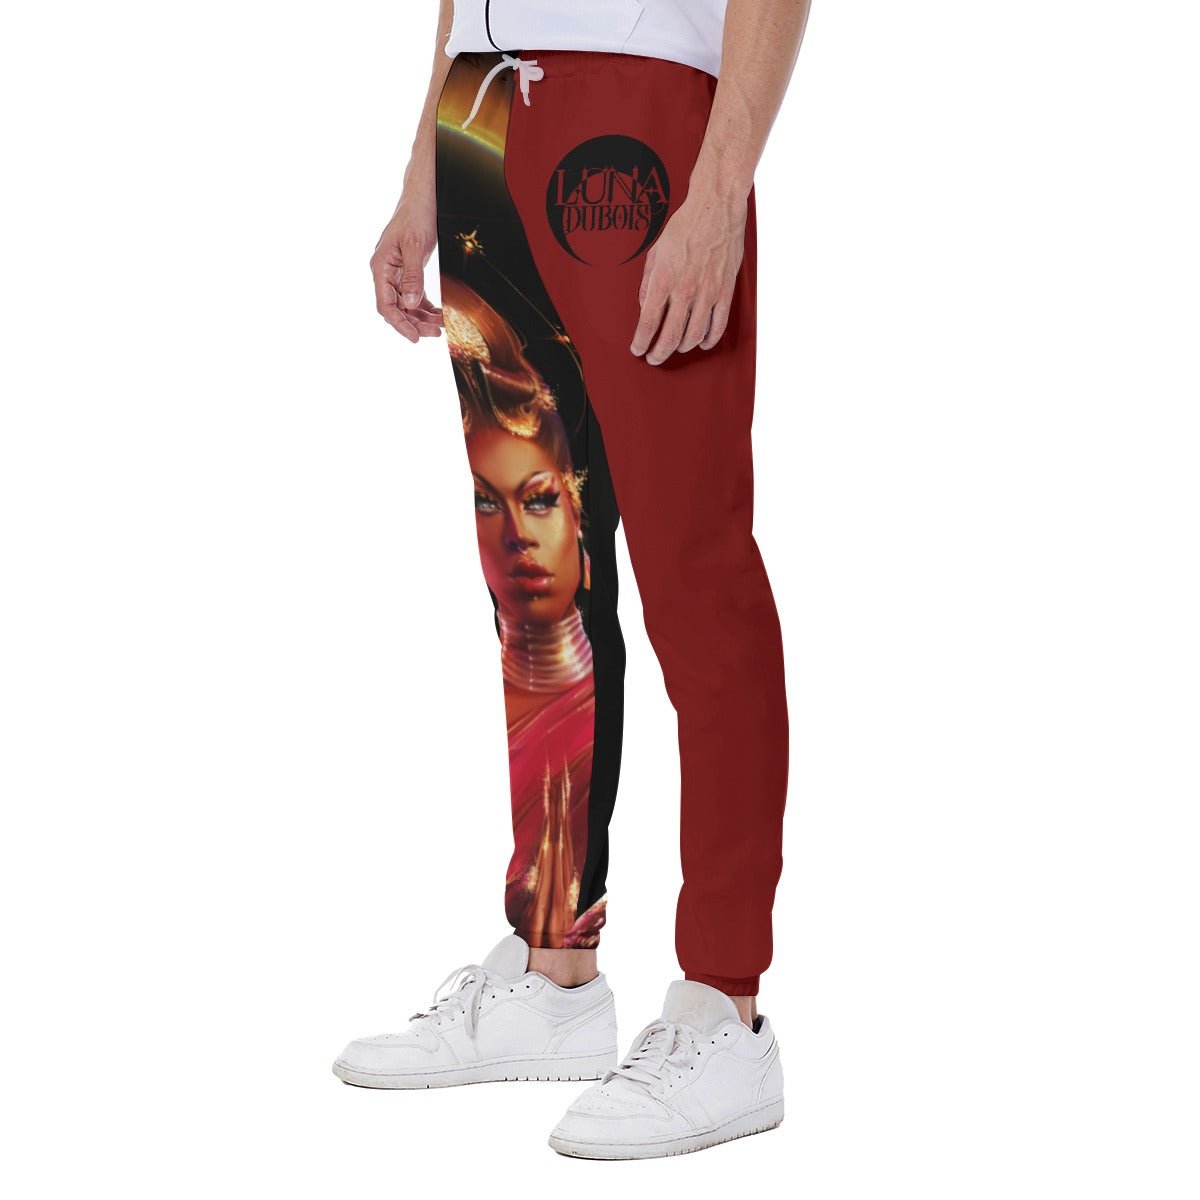 Luna Dubois - Goddess of the Moon All-Over Print Joggers - dragqueenmerch